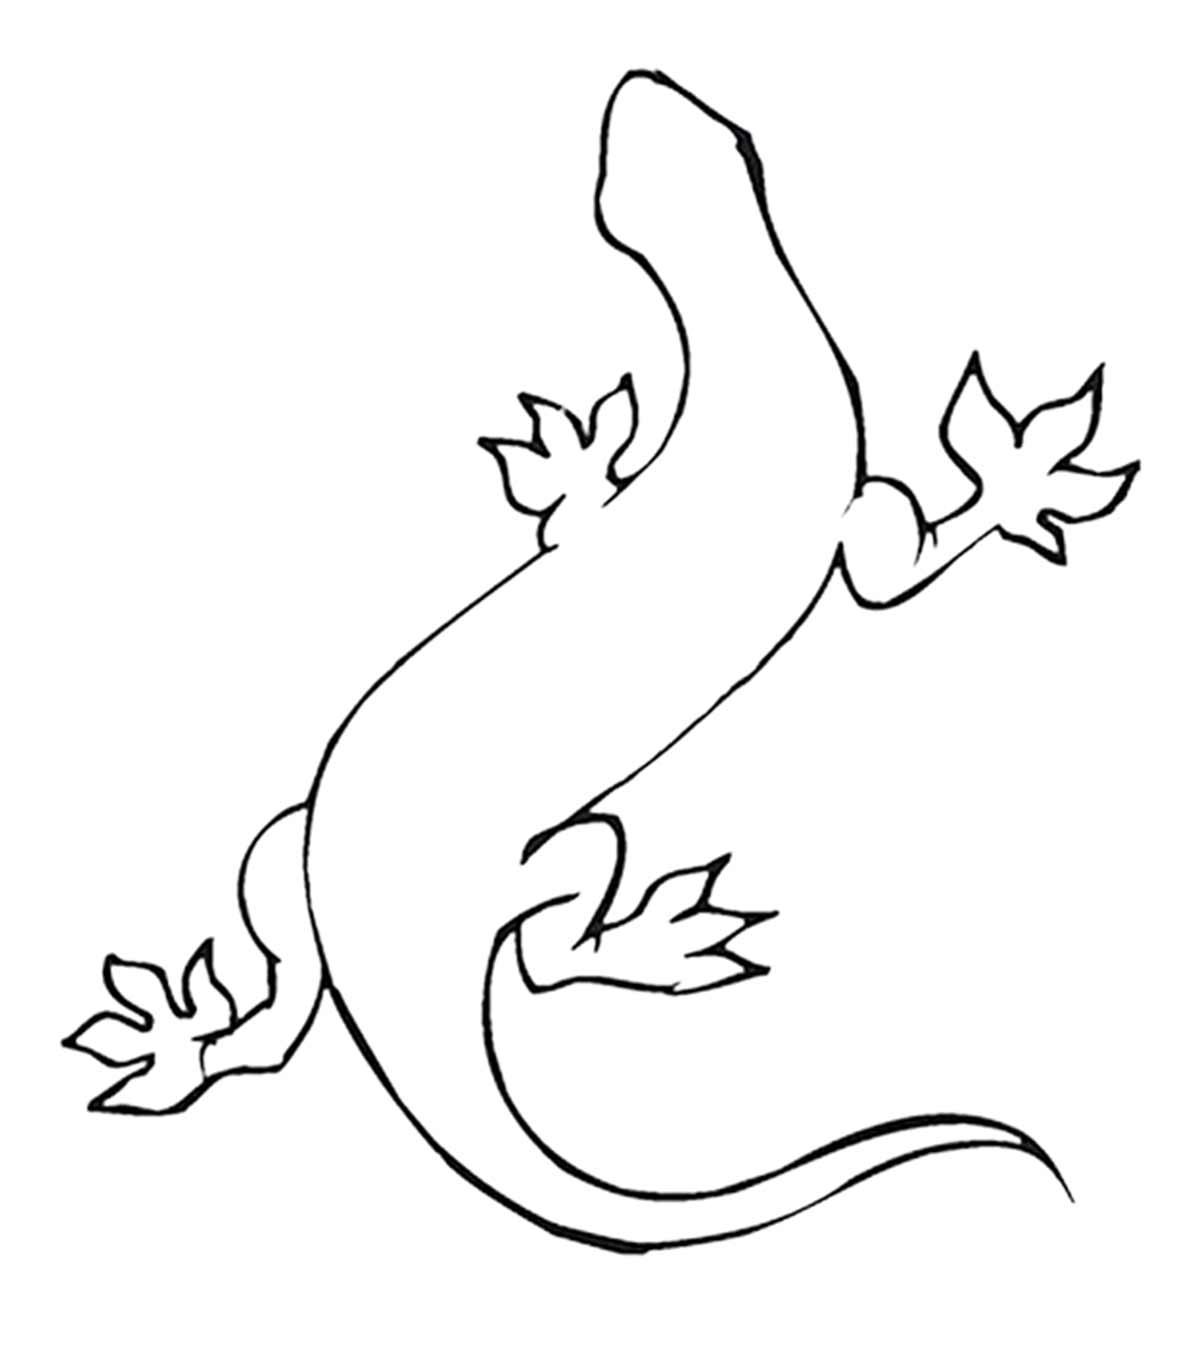 680 Top Lizard Coloring Book Pages For Free